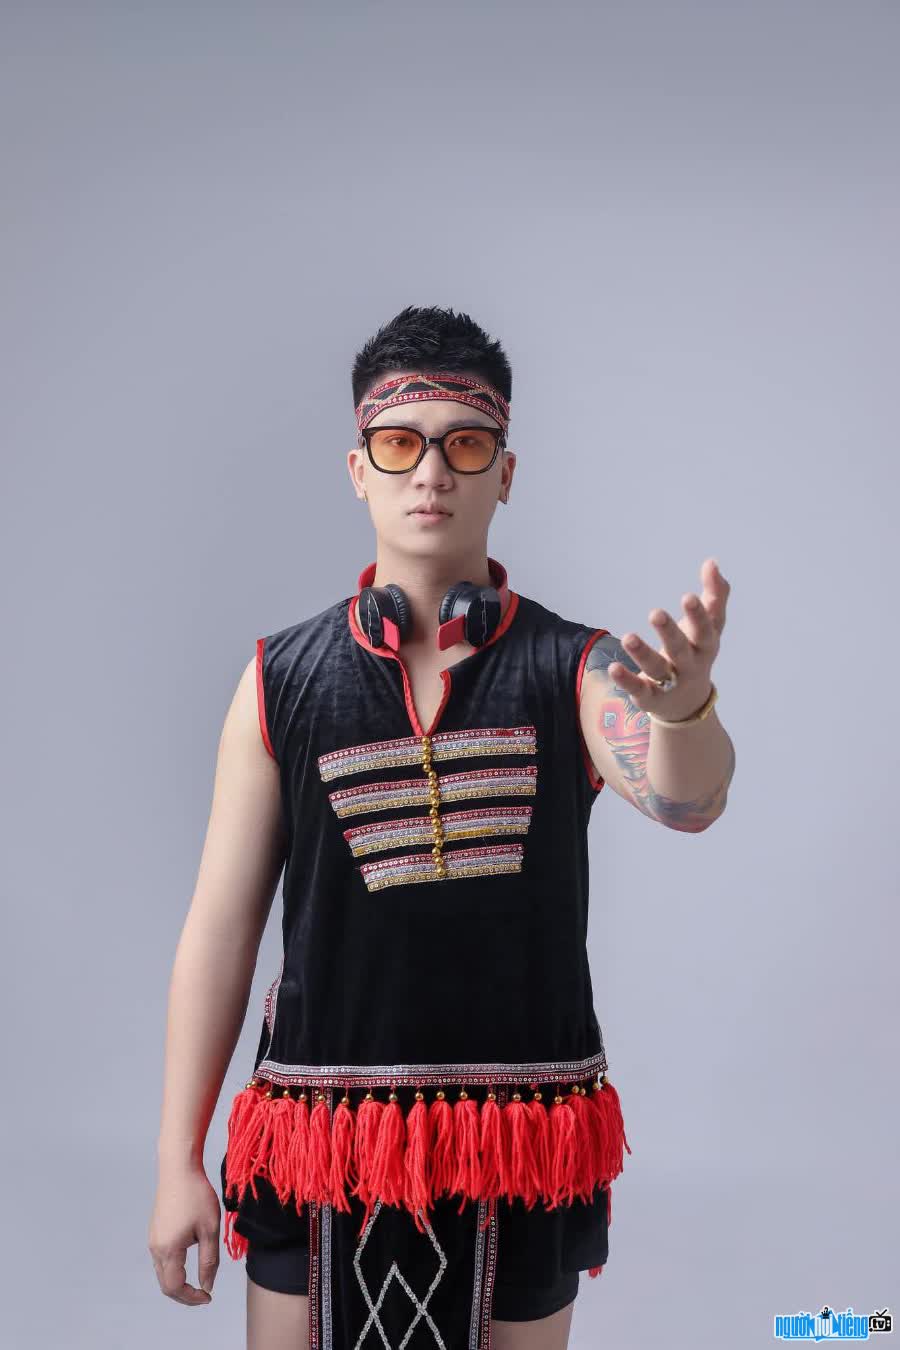 New picture of DJ Tung Xeng